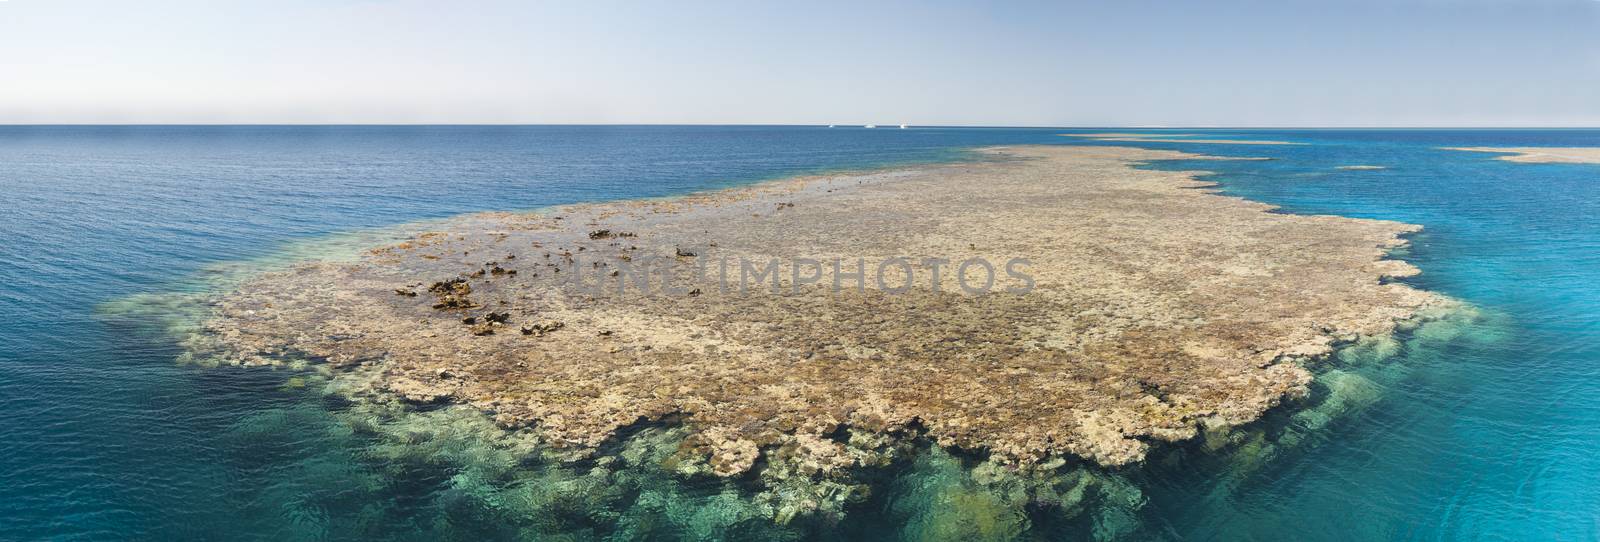 Panoramic view of a tropical coral reef in the sea